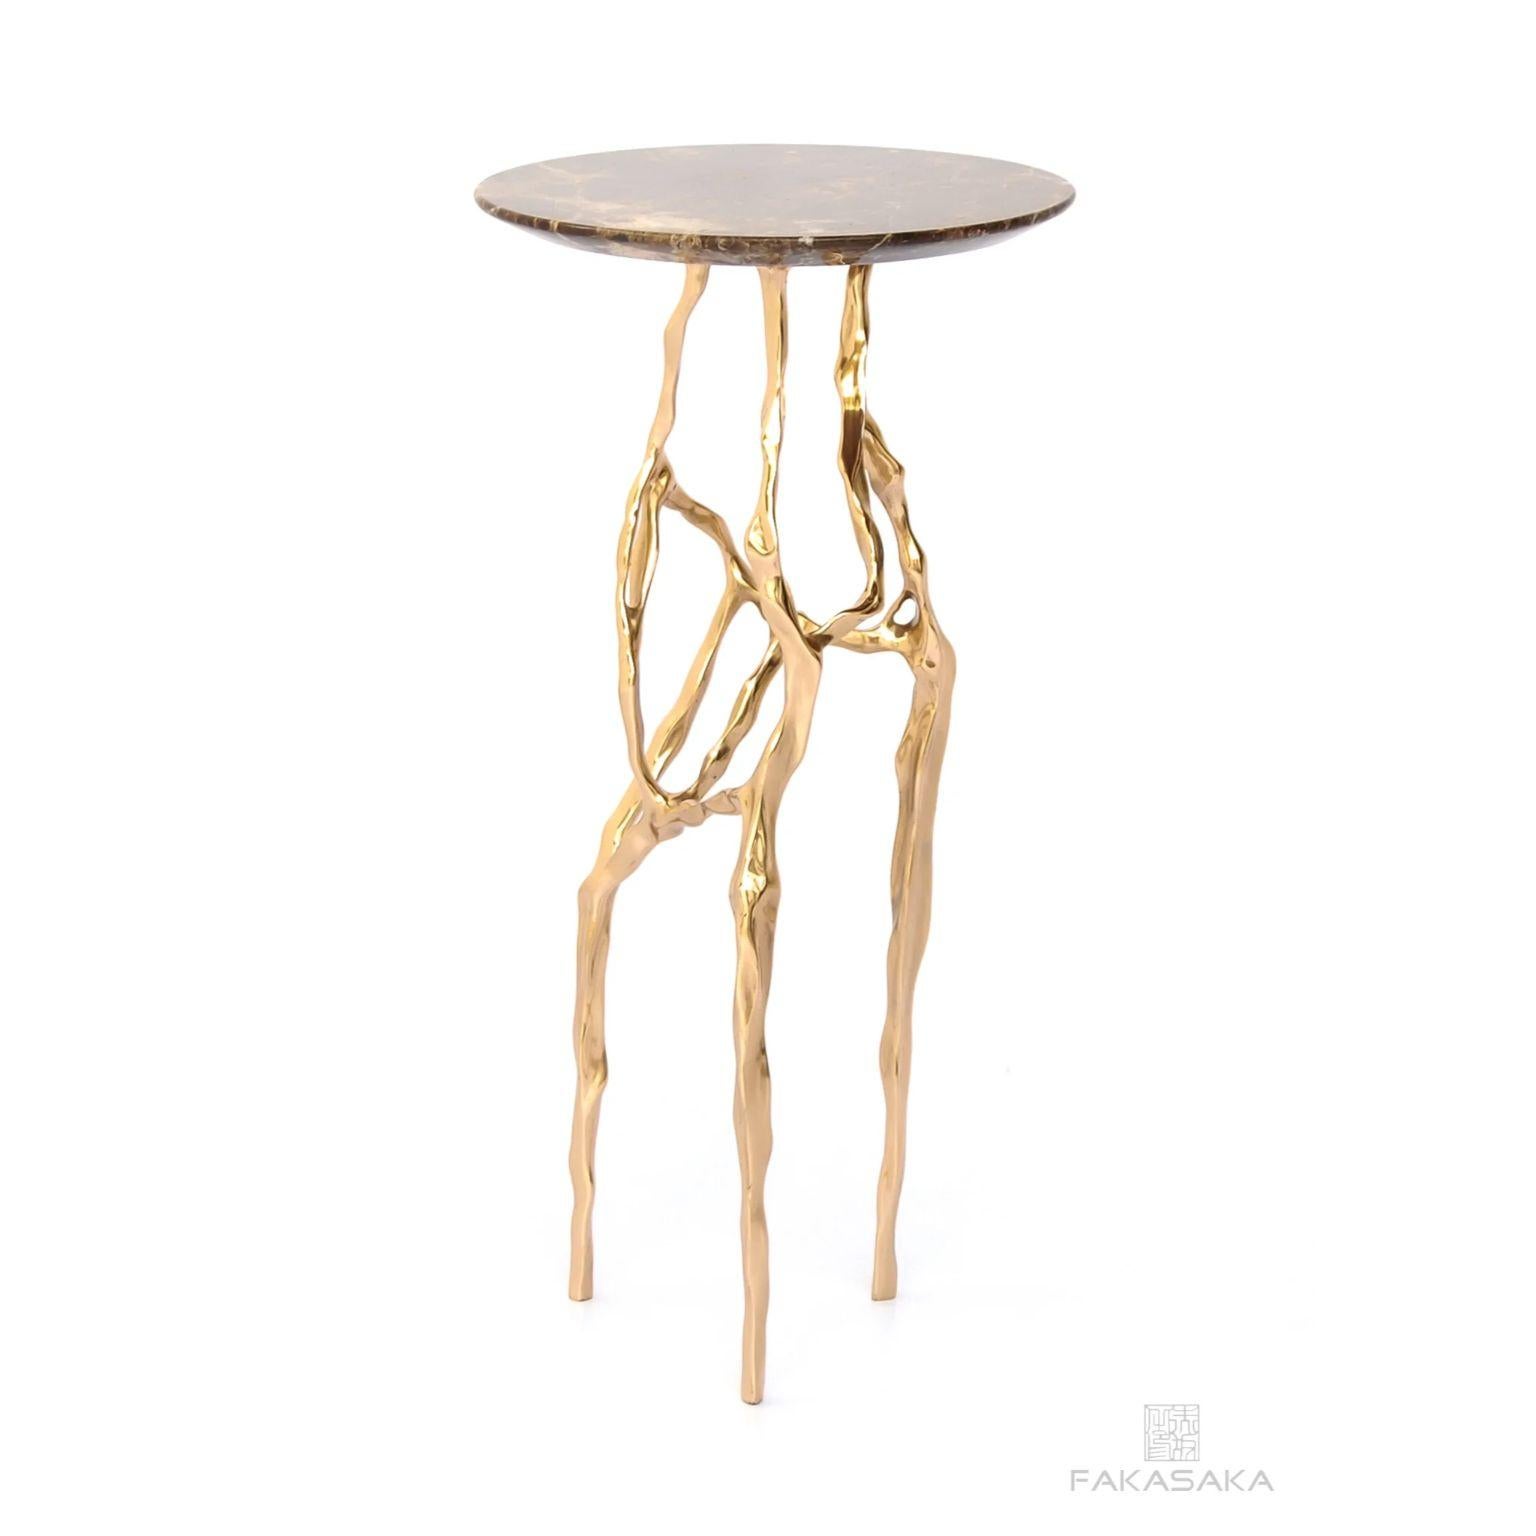 Modern Sid Drink Table with Marrom Imperial Marble Top by Fakasaka Design For Sale